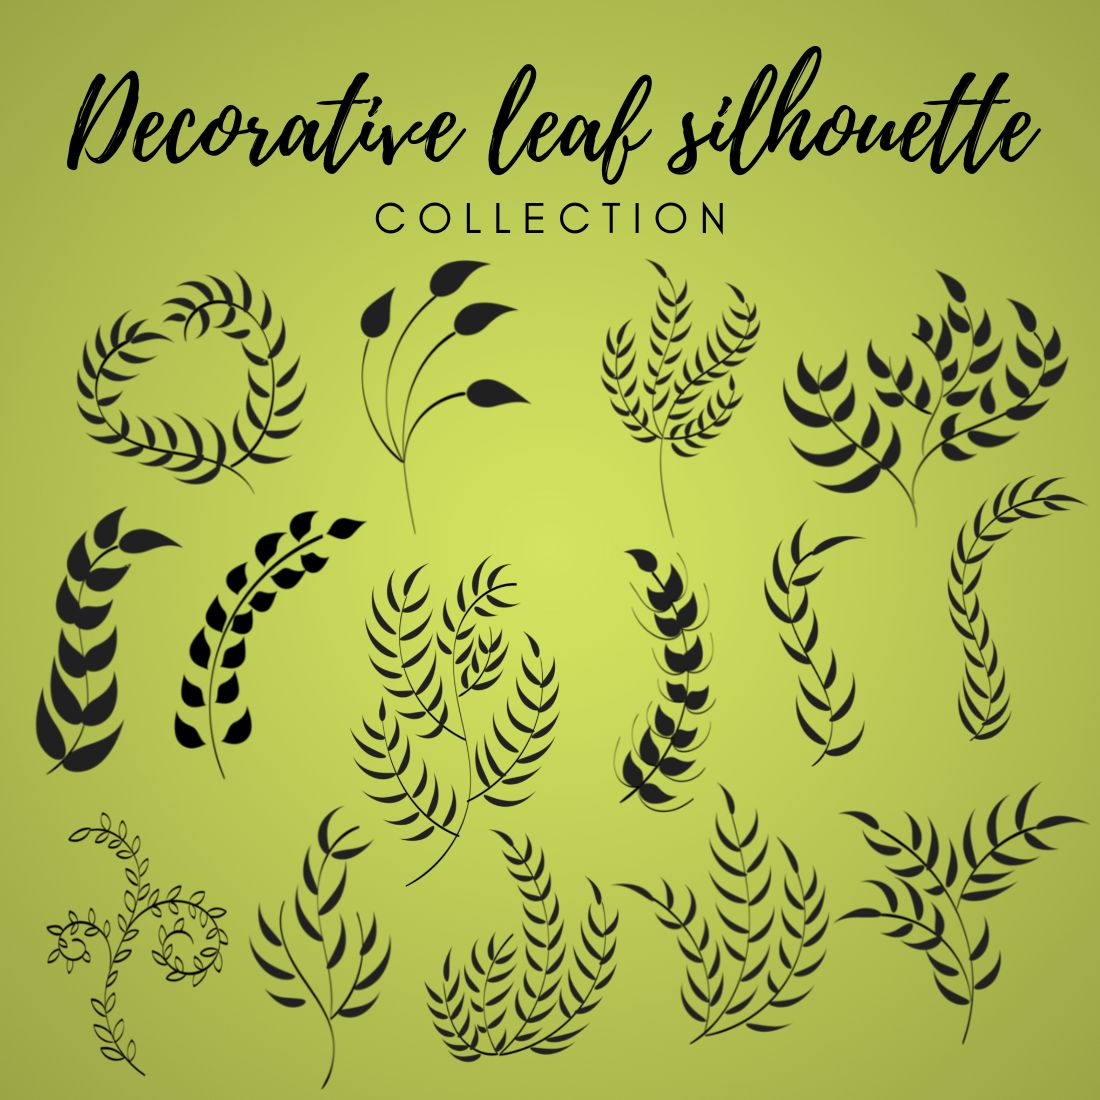 15 Decorative Leaf Silhouette - Only $8 facebook image.